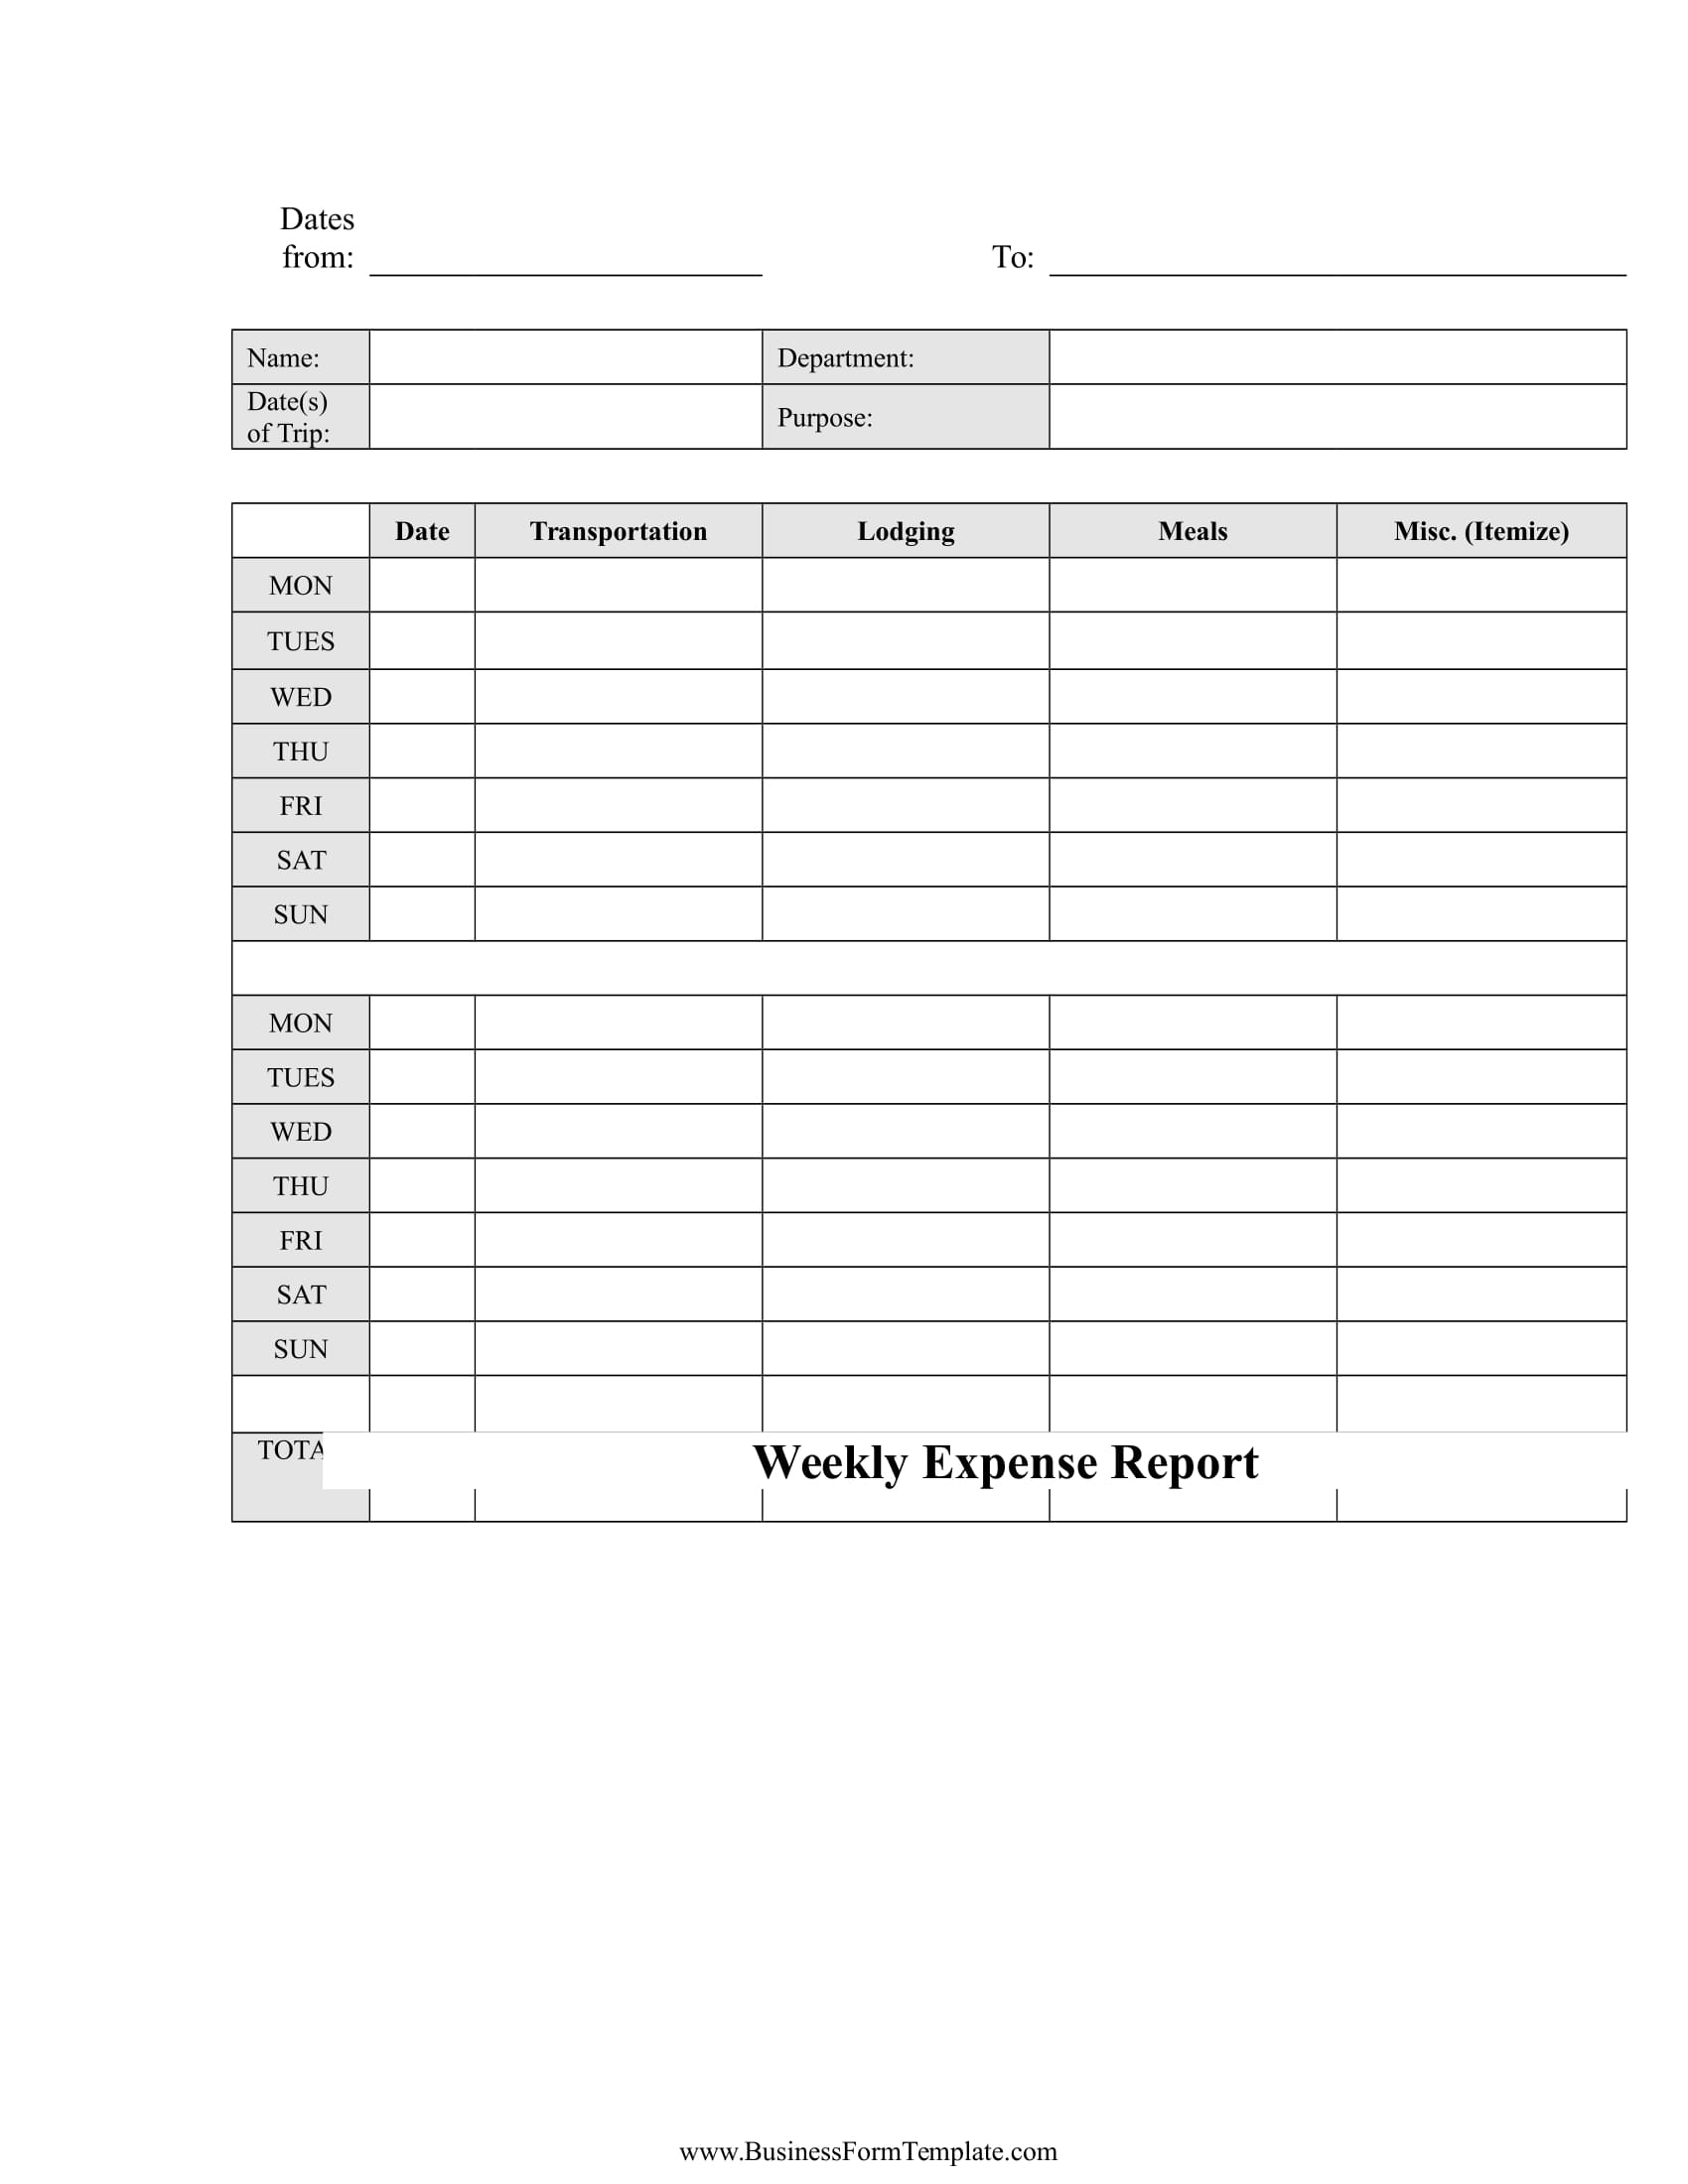 weekly expense report form 1